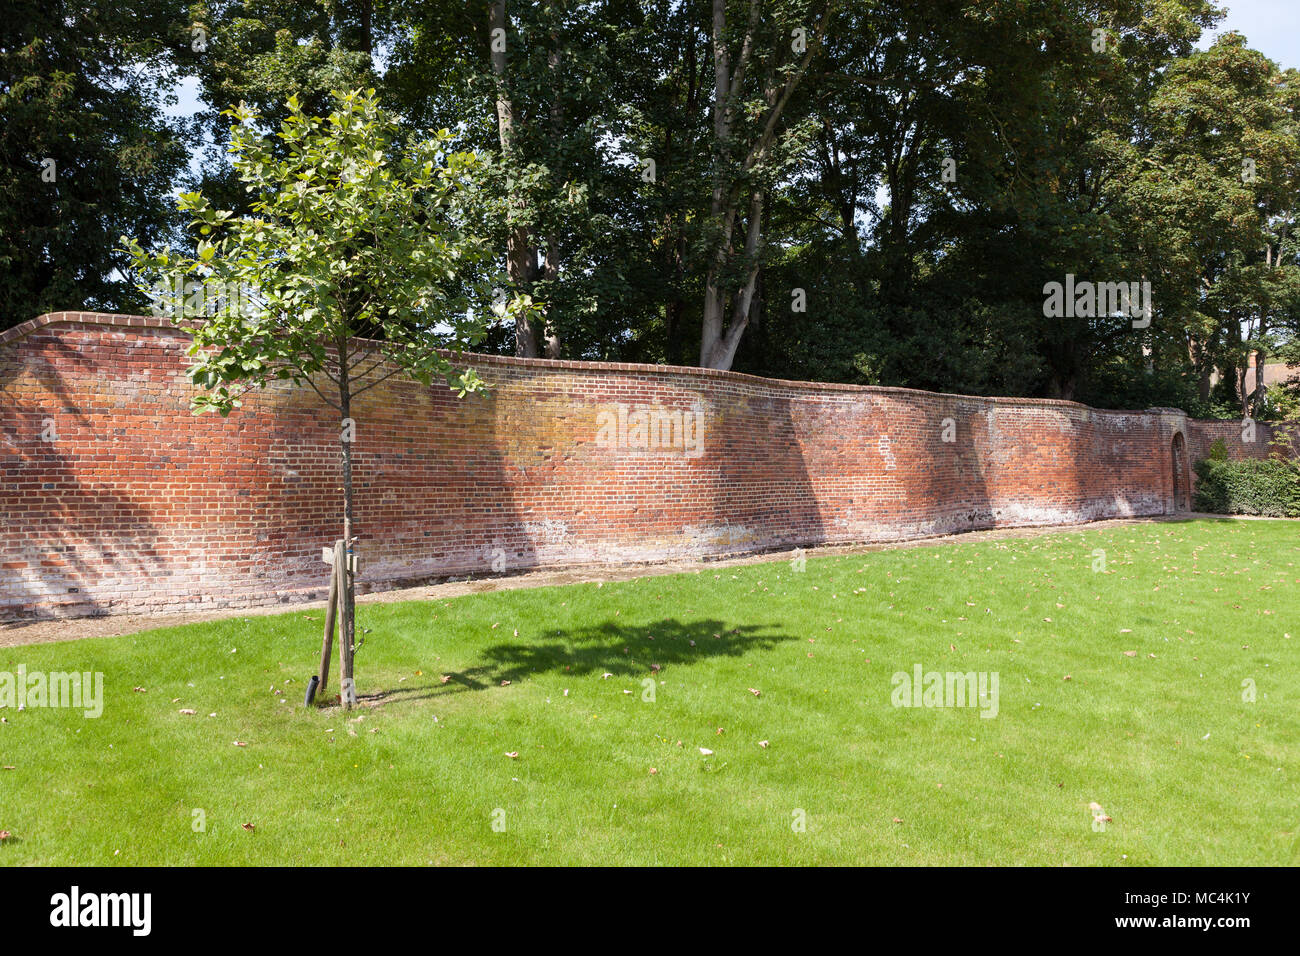 Crinkle crankle wall. Stock Photo